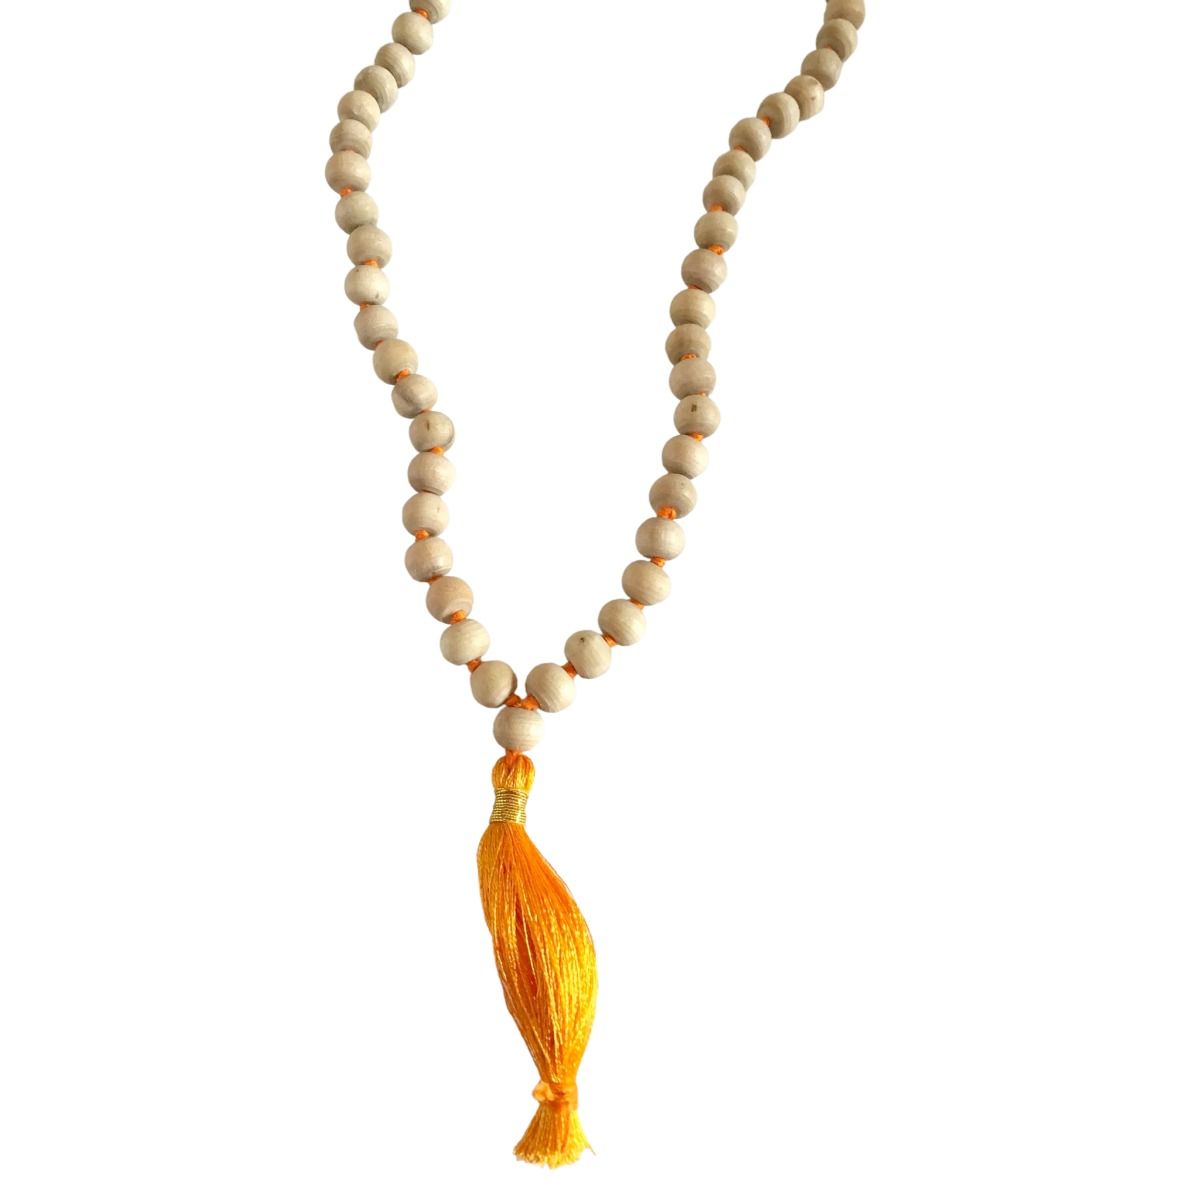 Tulasi Mala Necklace 8 mm 108 knotted